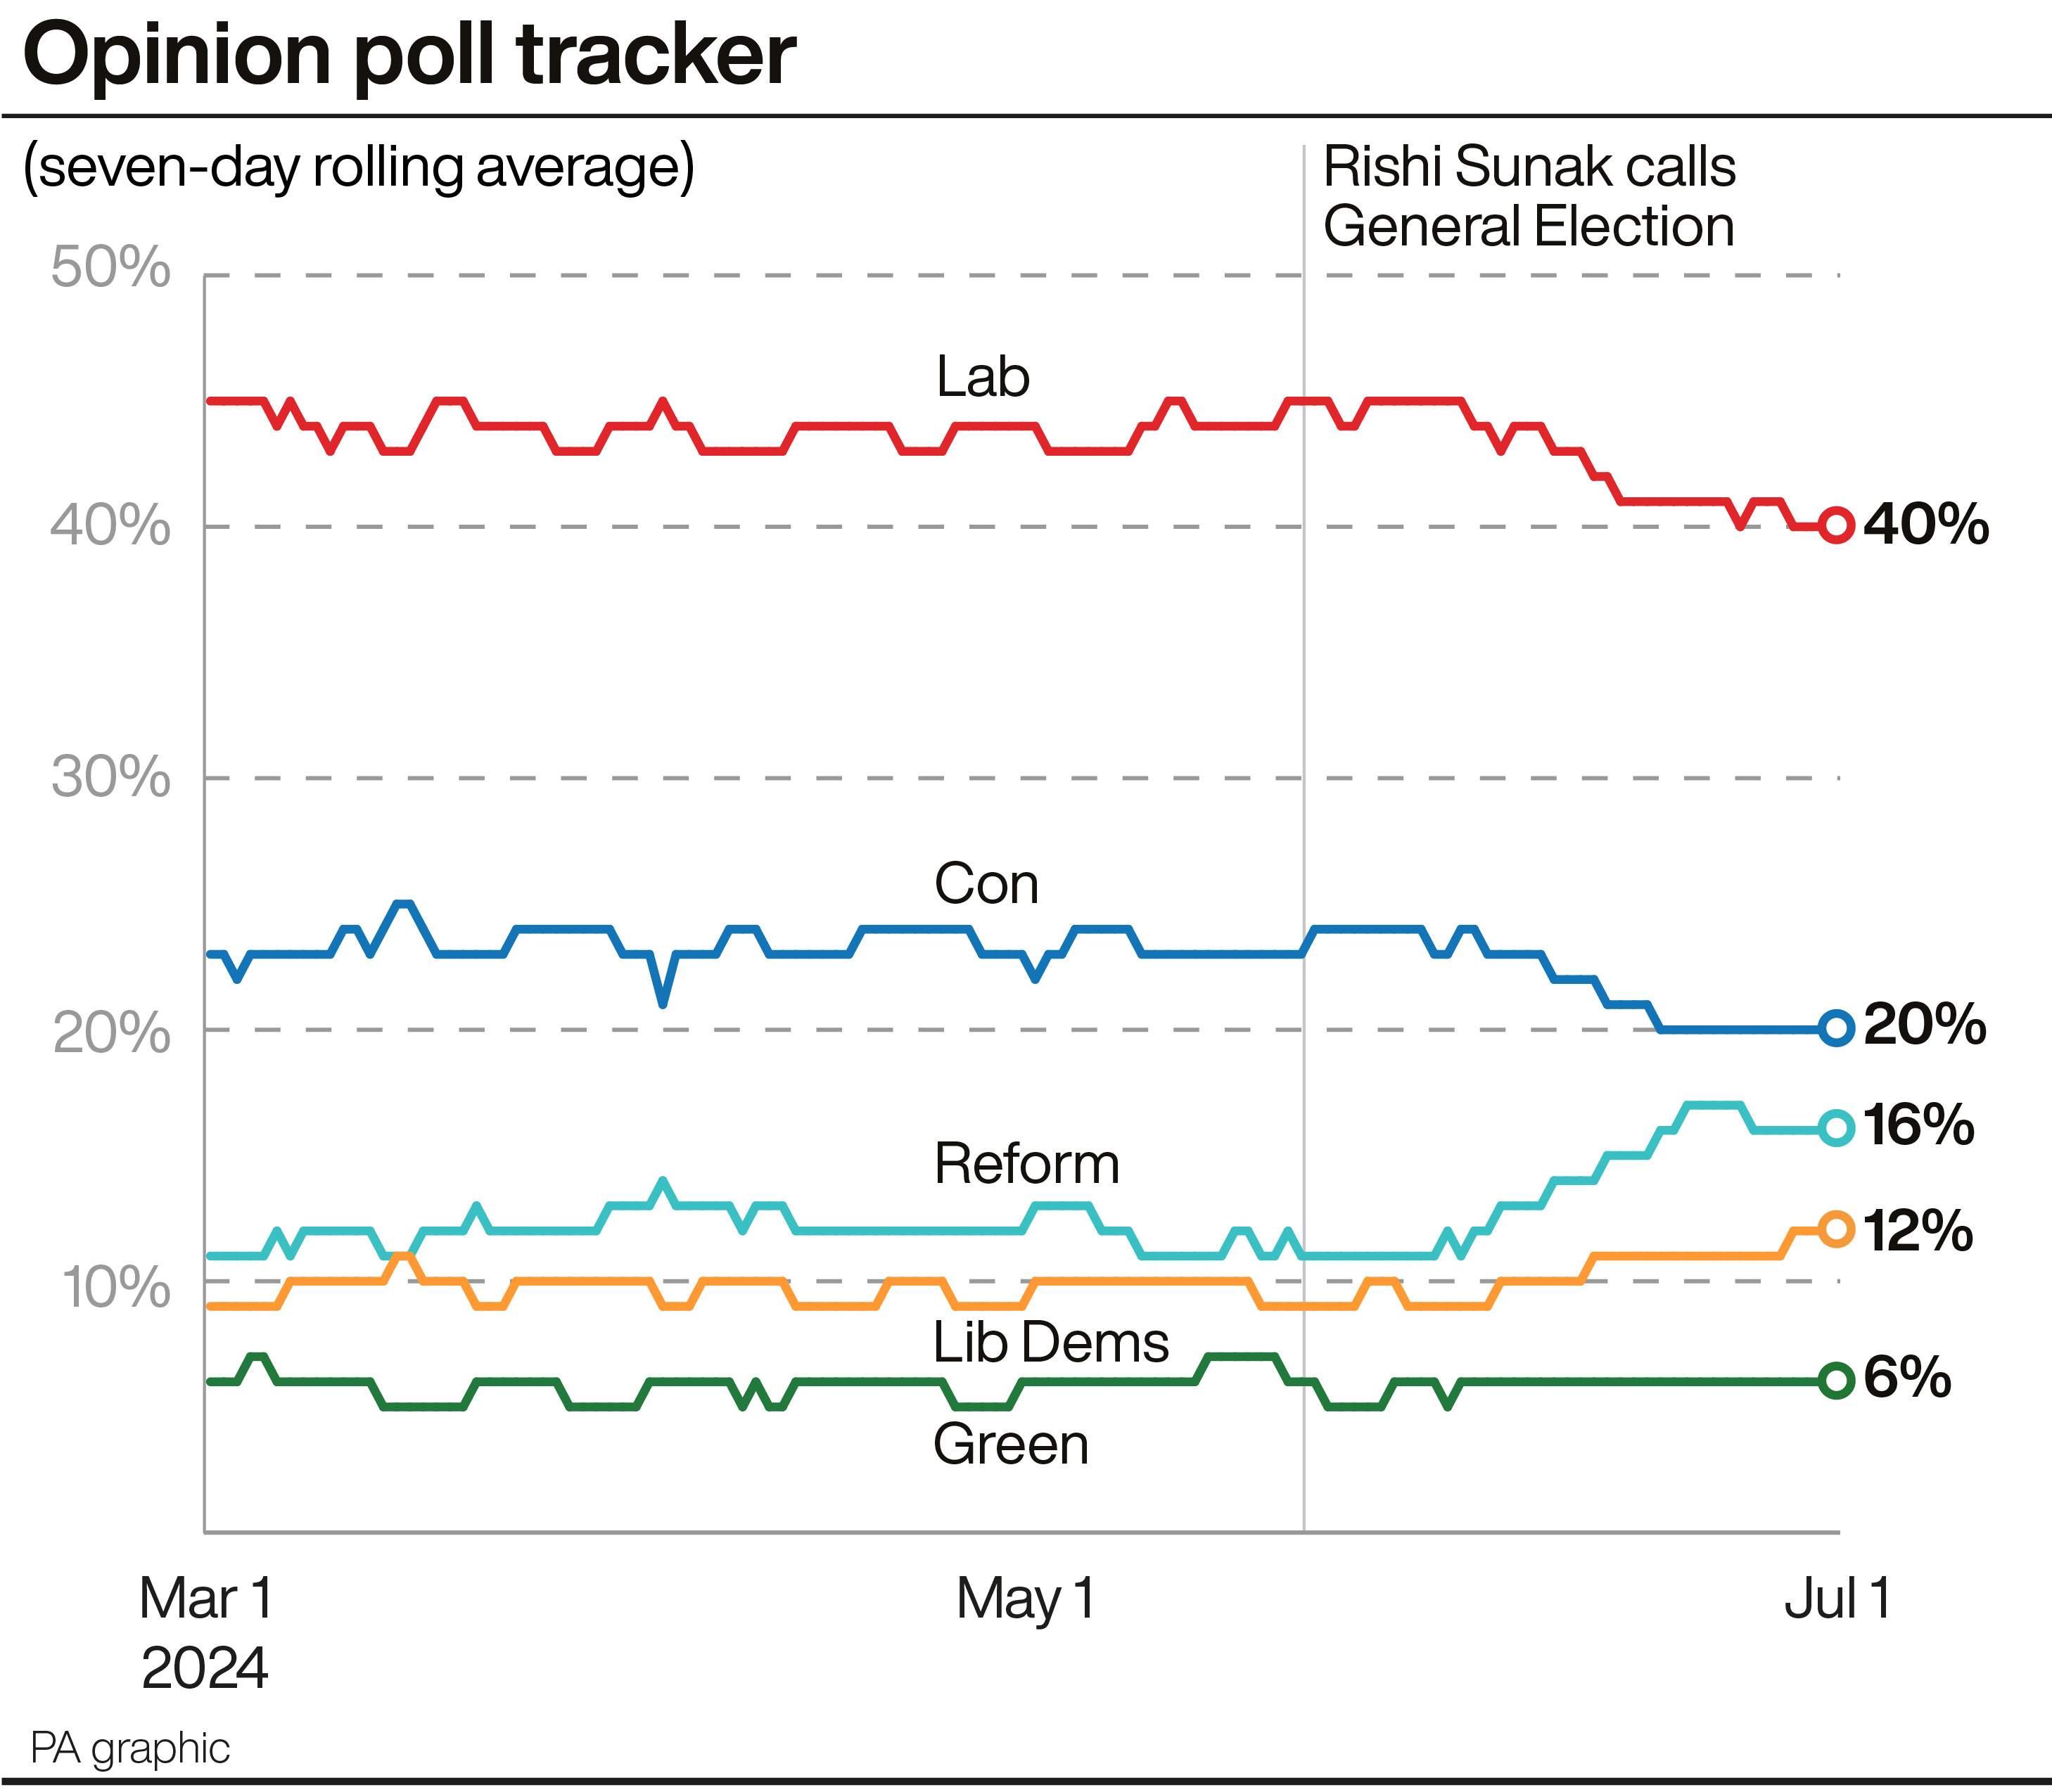 A line graph showing the latest opinion poll average for the main political parties, with Labour currently on 40%, 20 points ahead of the Conservatives on 20%, followed by Reform on 16%, the Lib Dems on 12% and the Greens on 6%